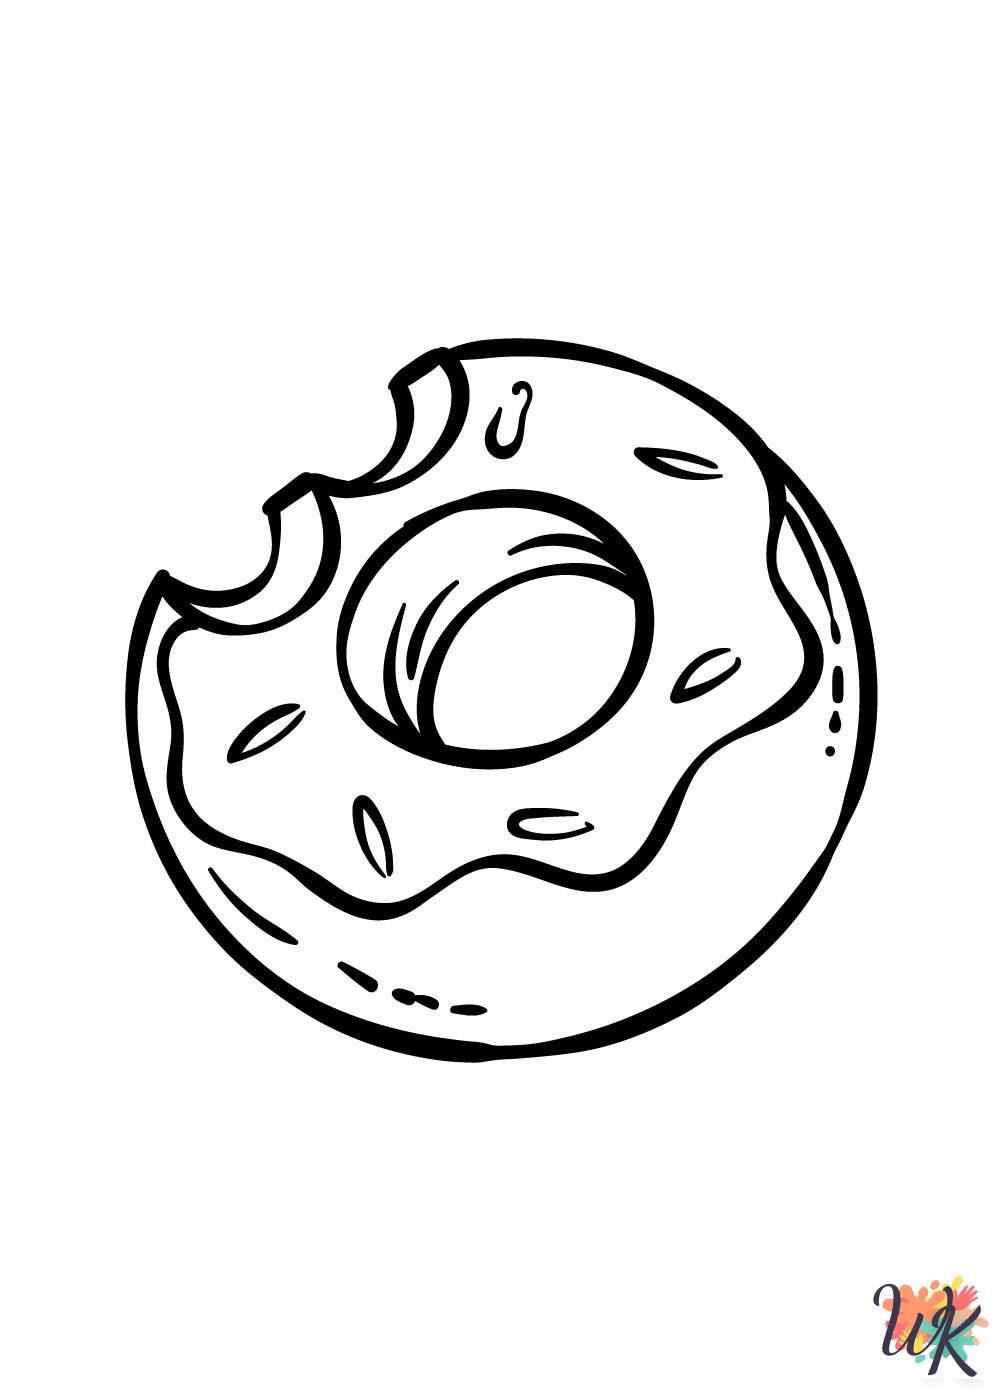 Donut coloring pages printable free